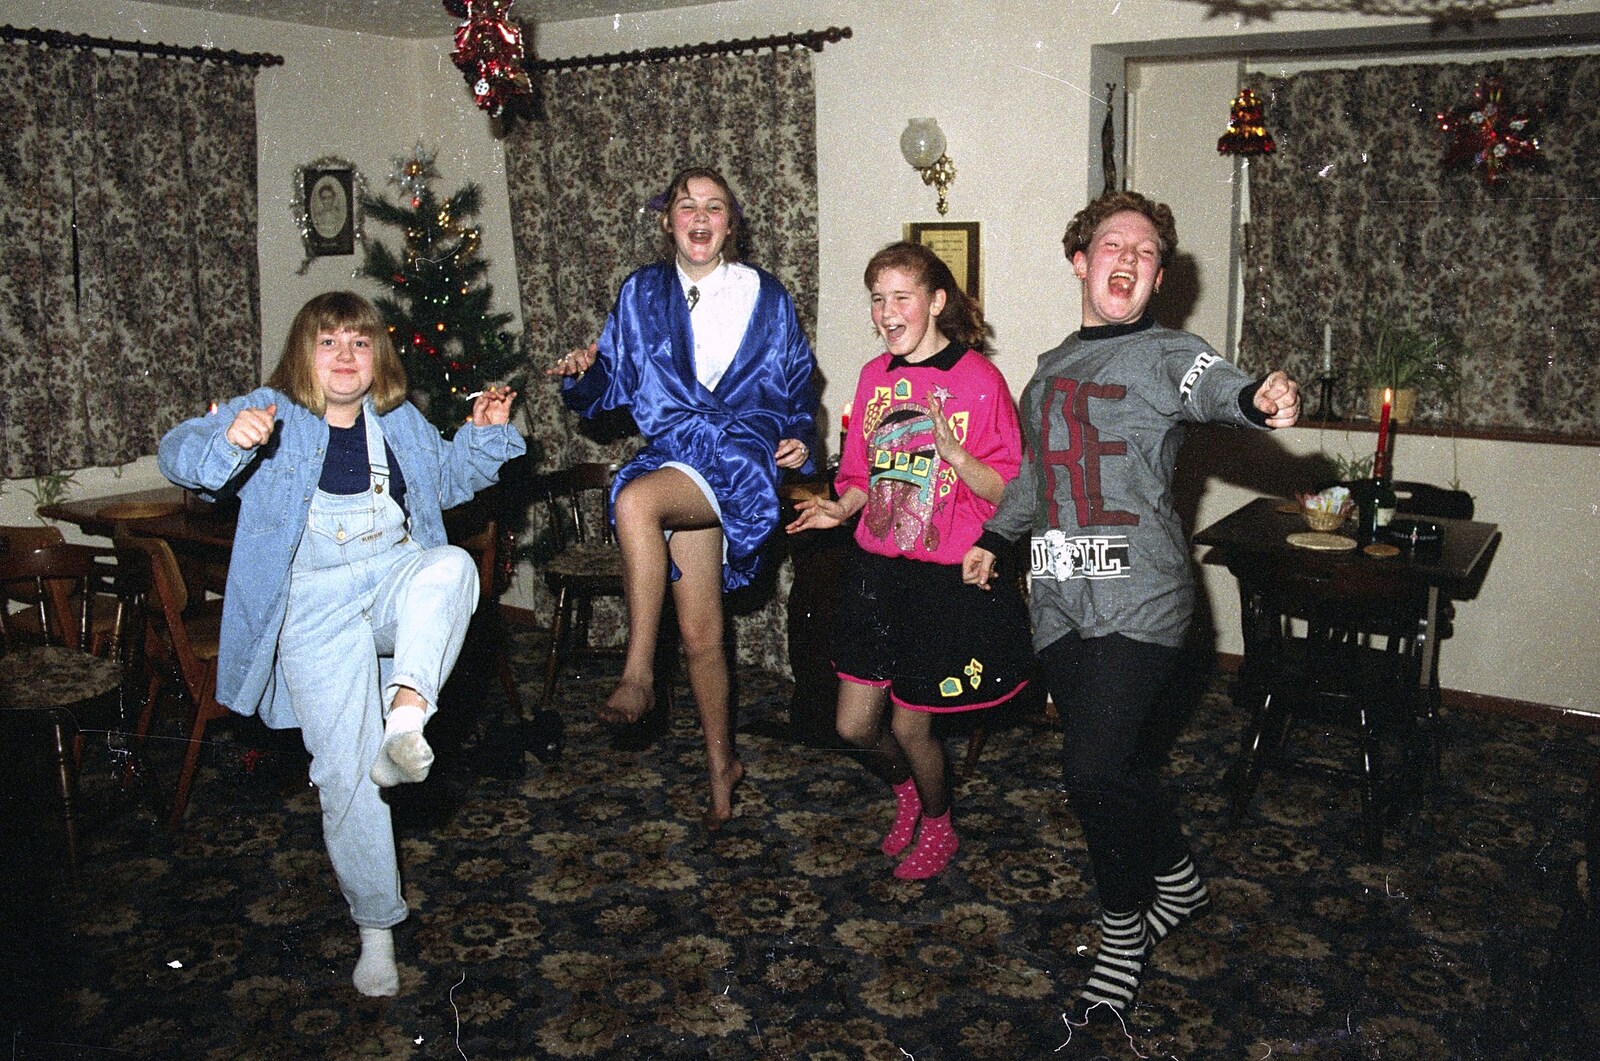 A bit of teenage dancing occurs from New Year's Eve at the Swan Inn, Brome, Suffolk - 31st December 1991